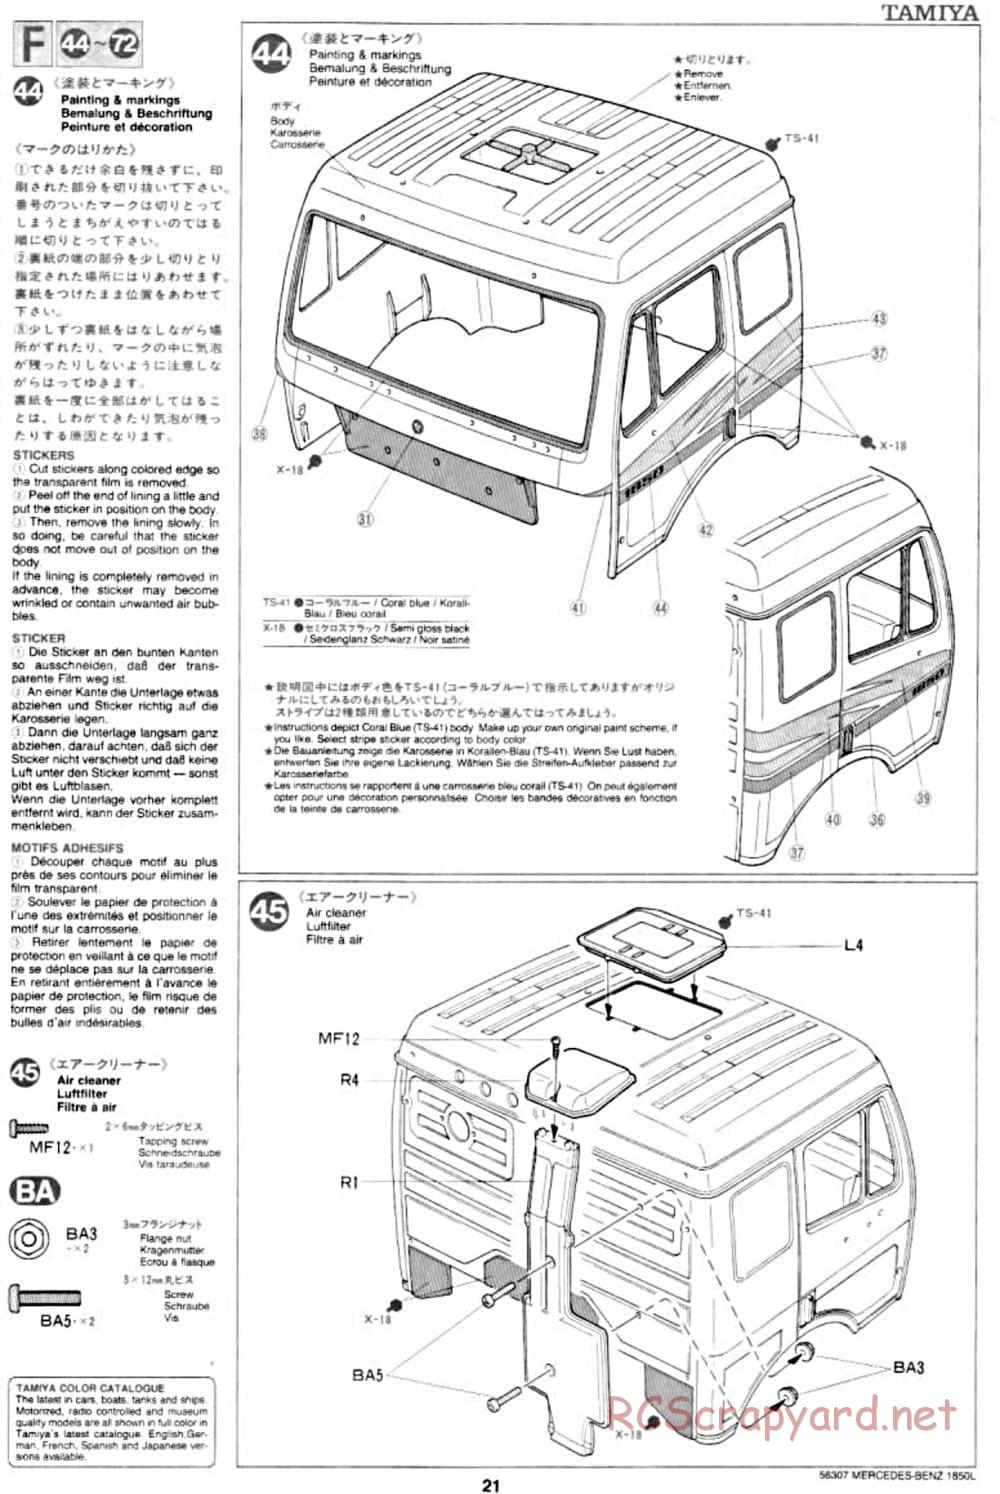 Tamiya - Mercedes-Benz 1850L Delivery Truck - Manual - Page 21